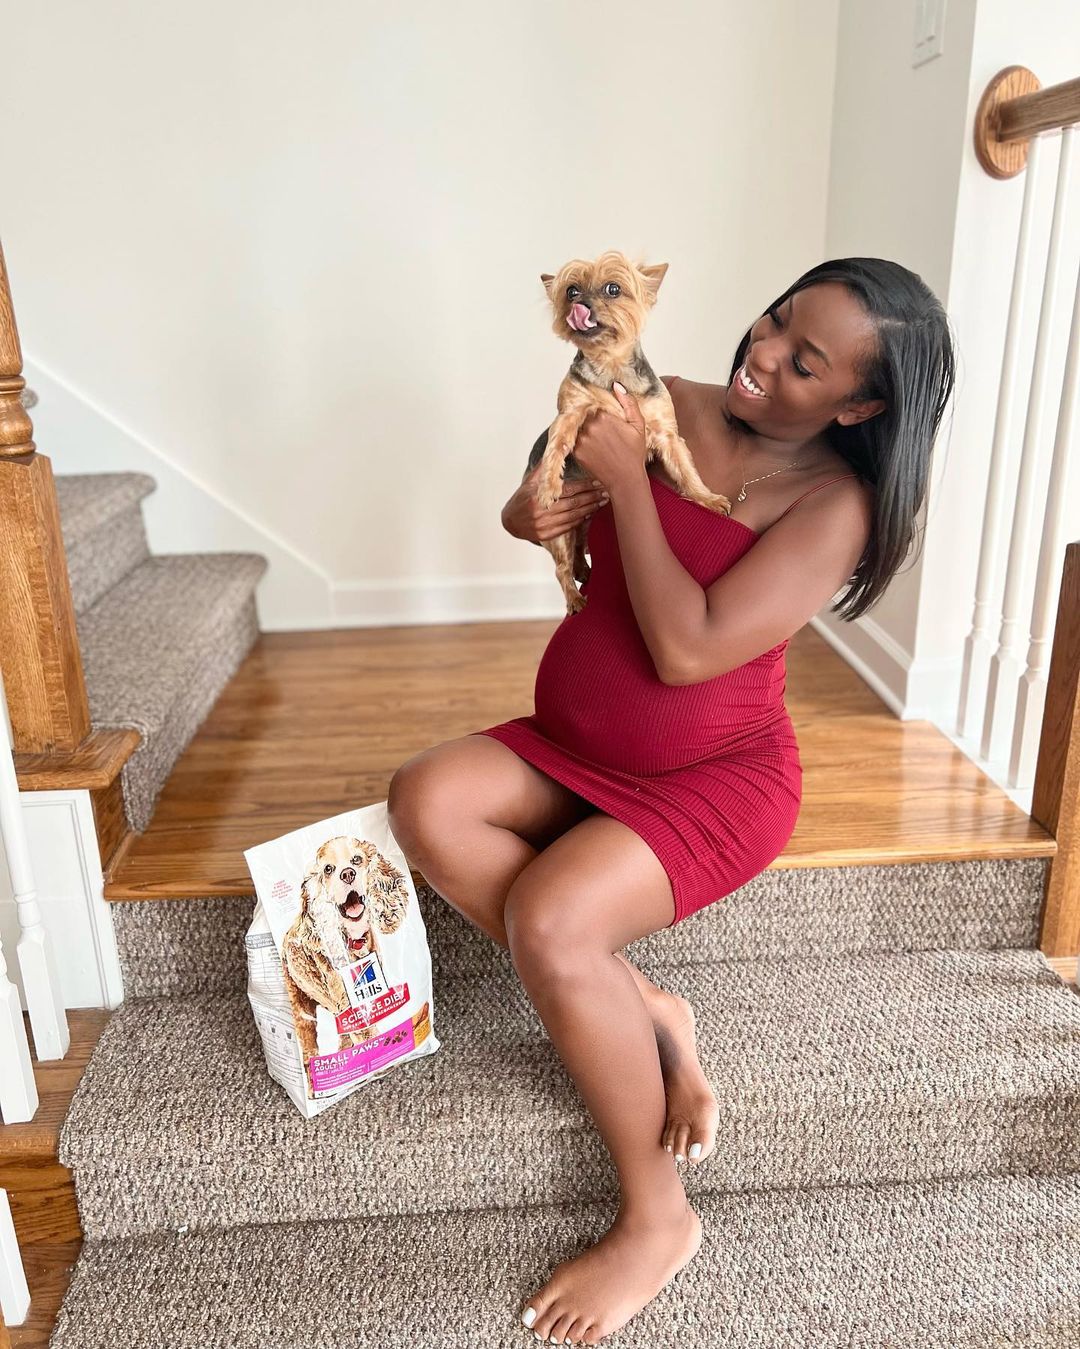 Briana Myles cuddles her dog on the staircase.